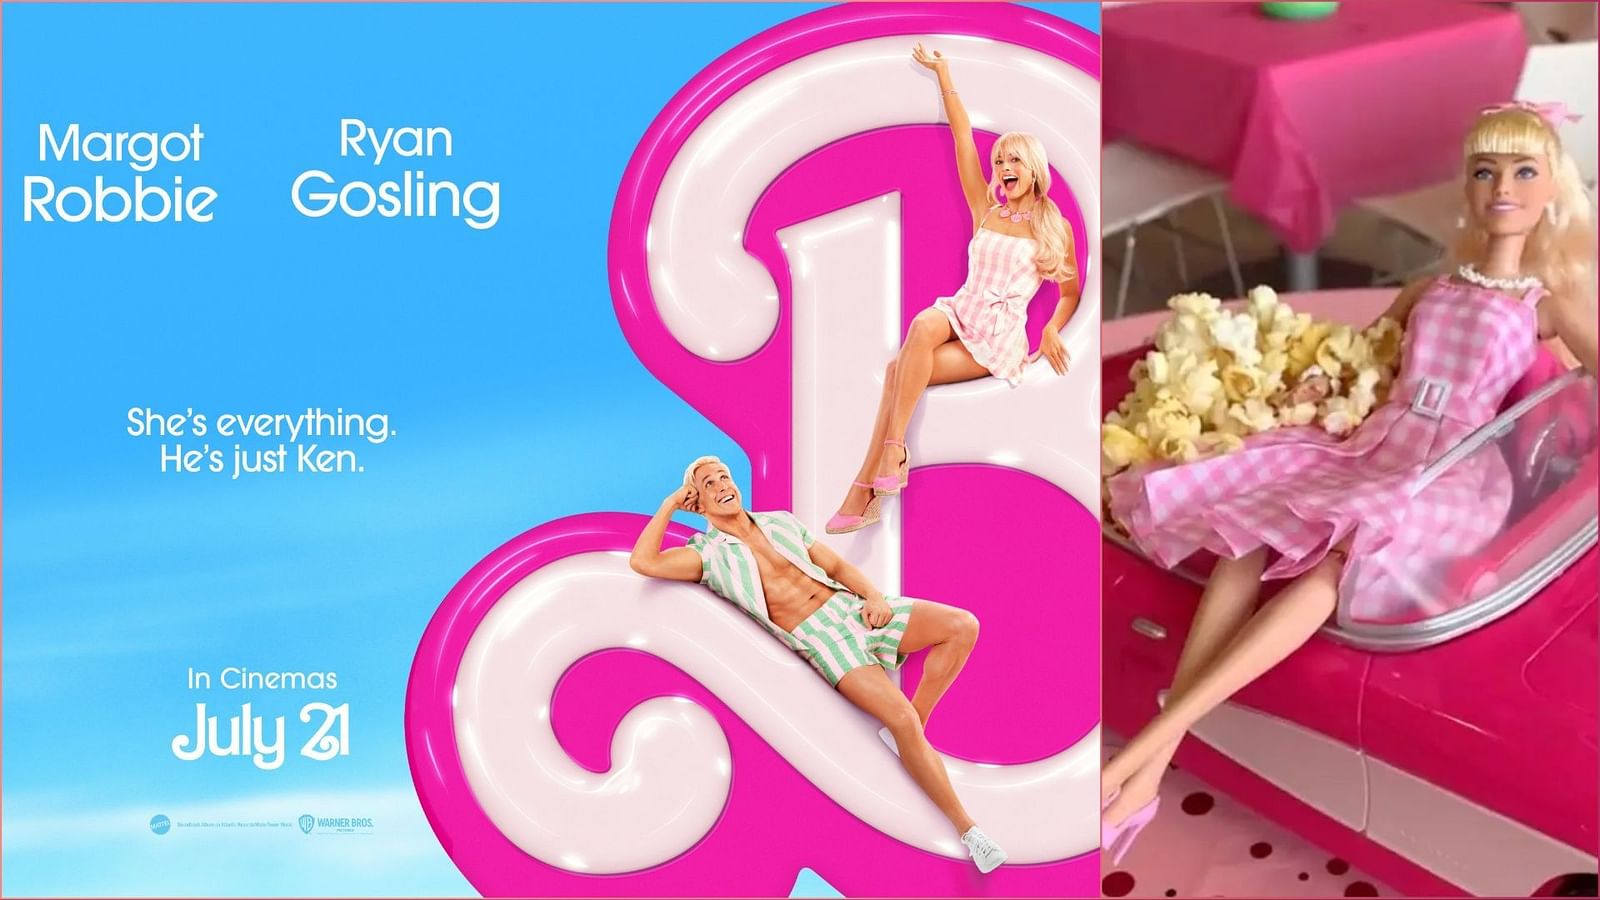 AMC Barbie popcorn bucket How to get, price, and all you need to know